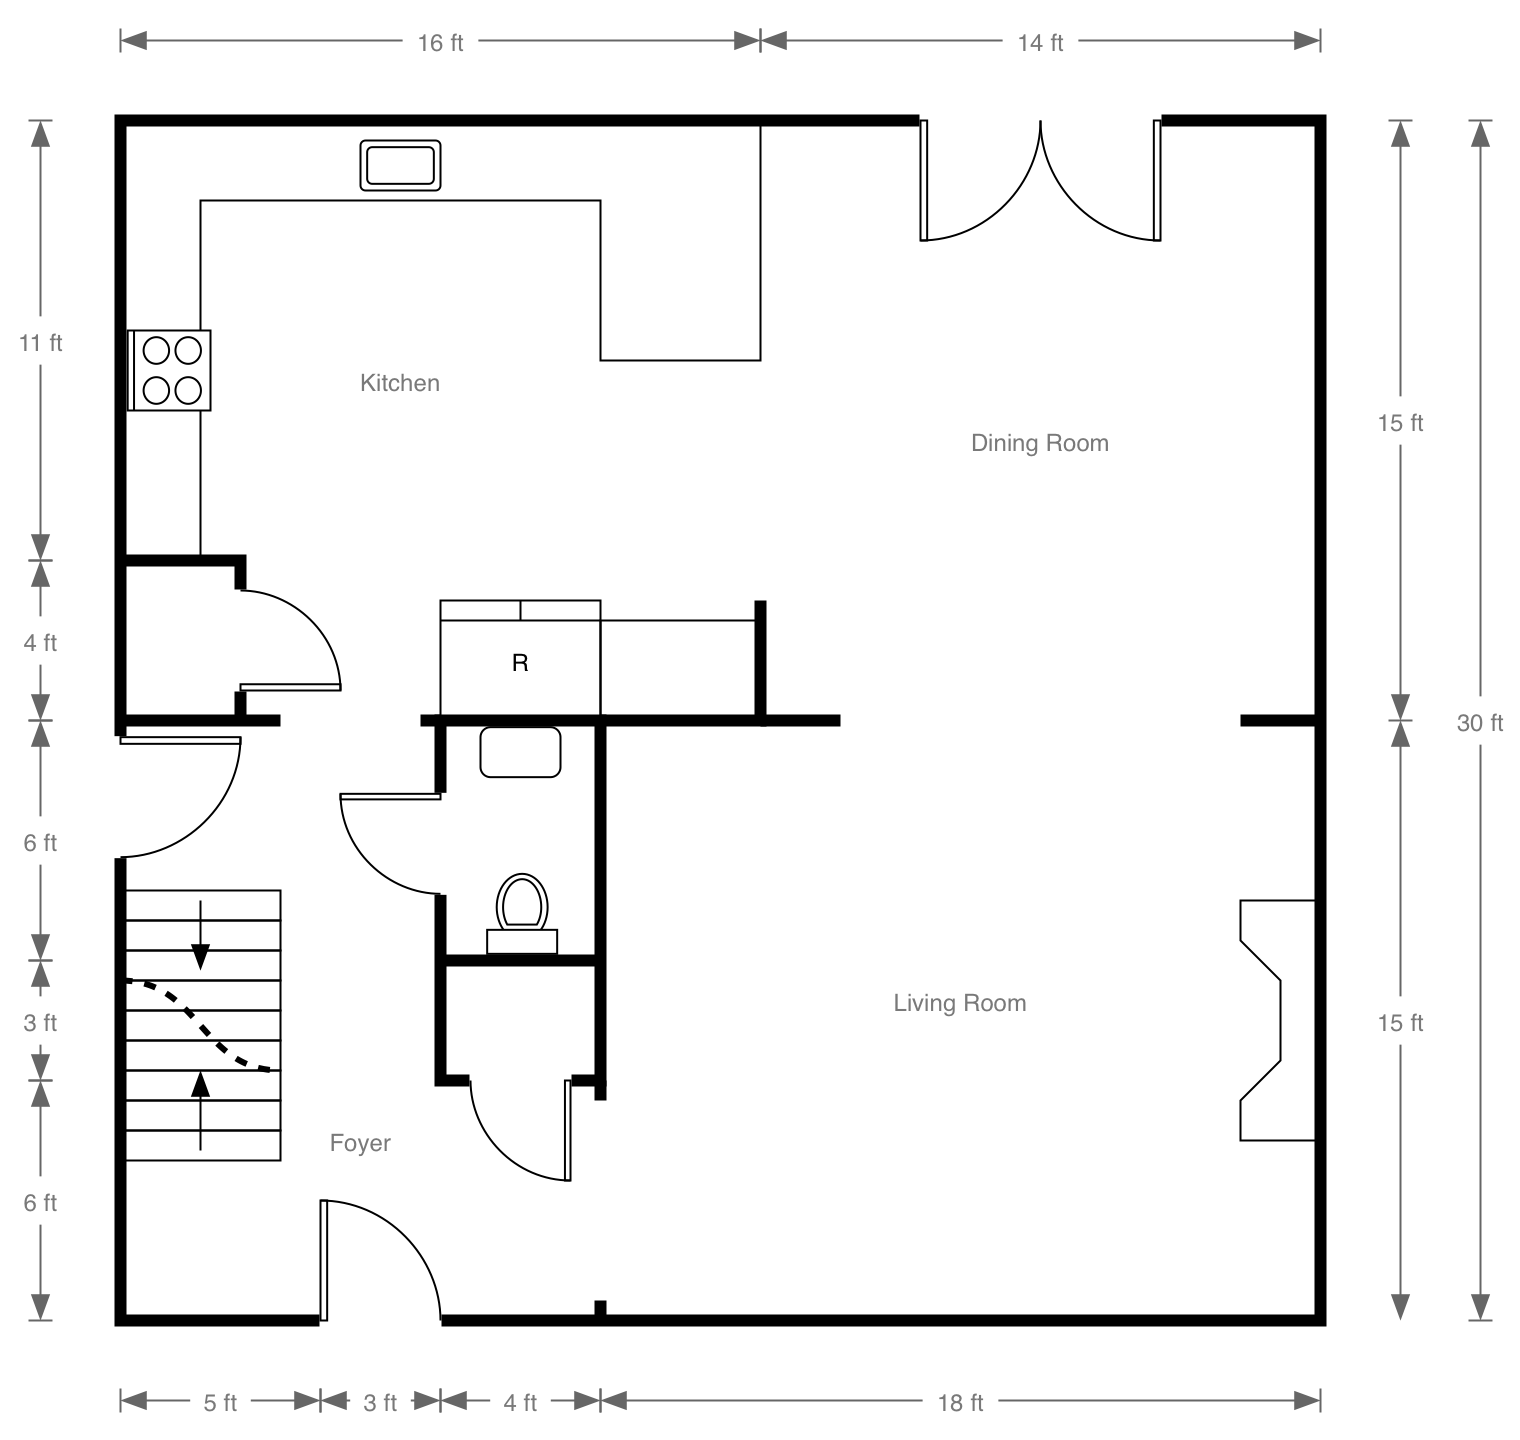 What math can you do with the walls around you? House Floor Plan with Dimension